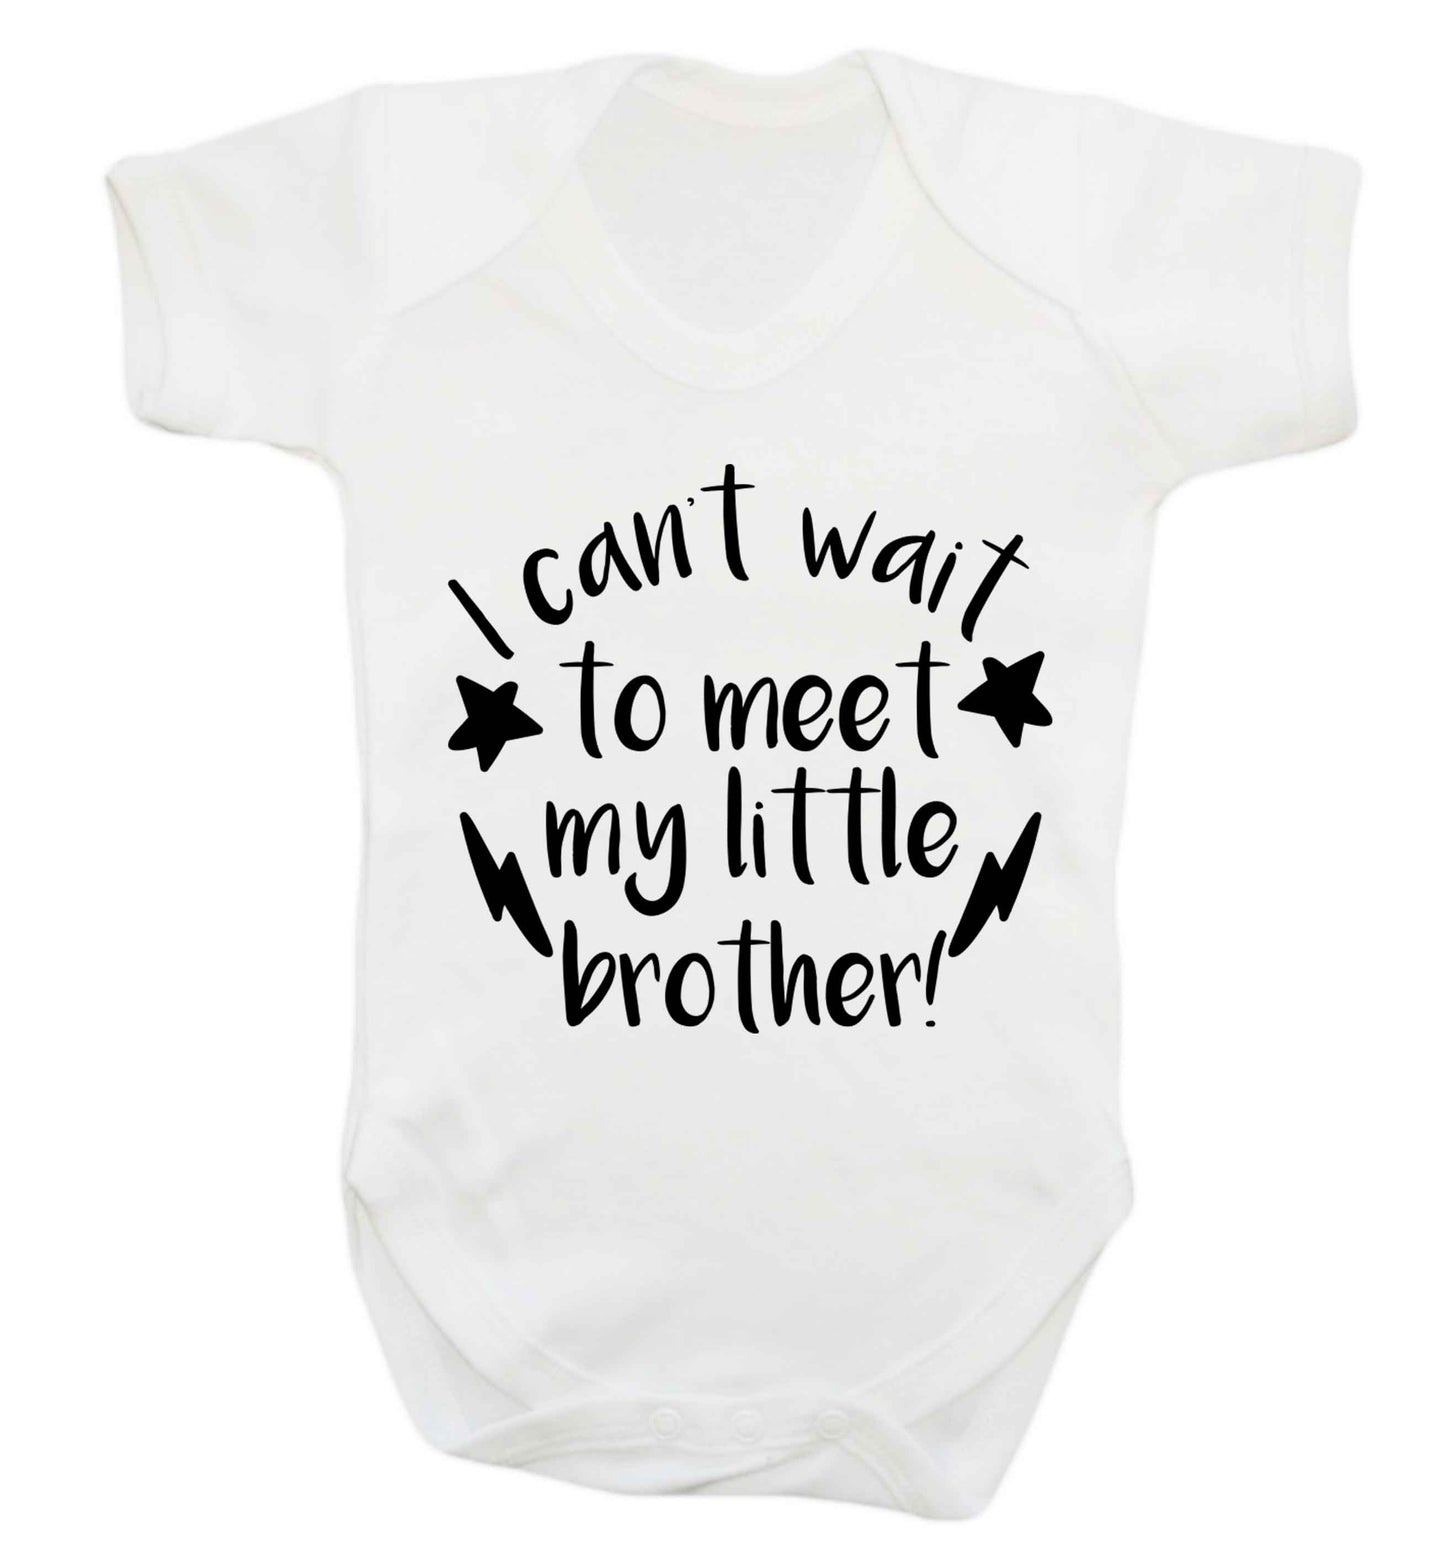 I can't wait to meet my sister! Baby Vest white 18-24 months